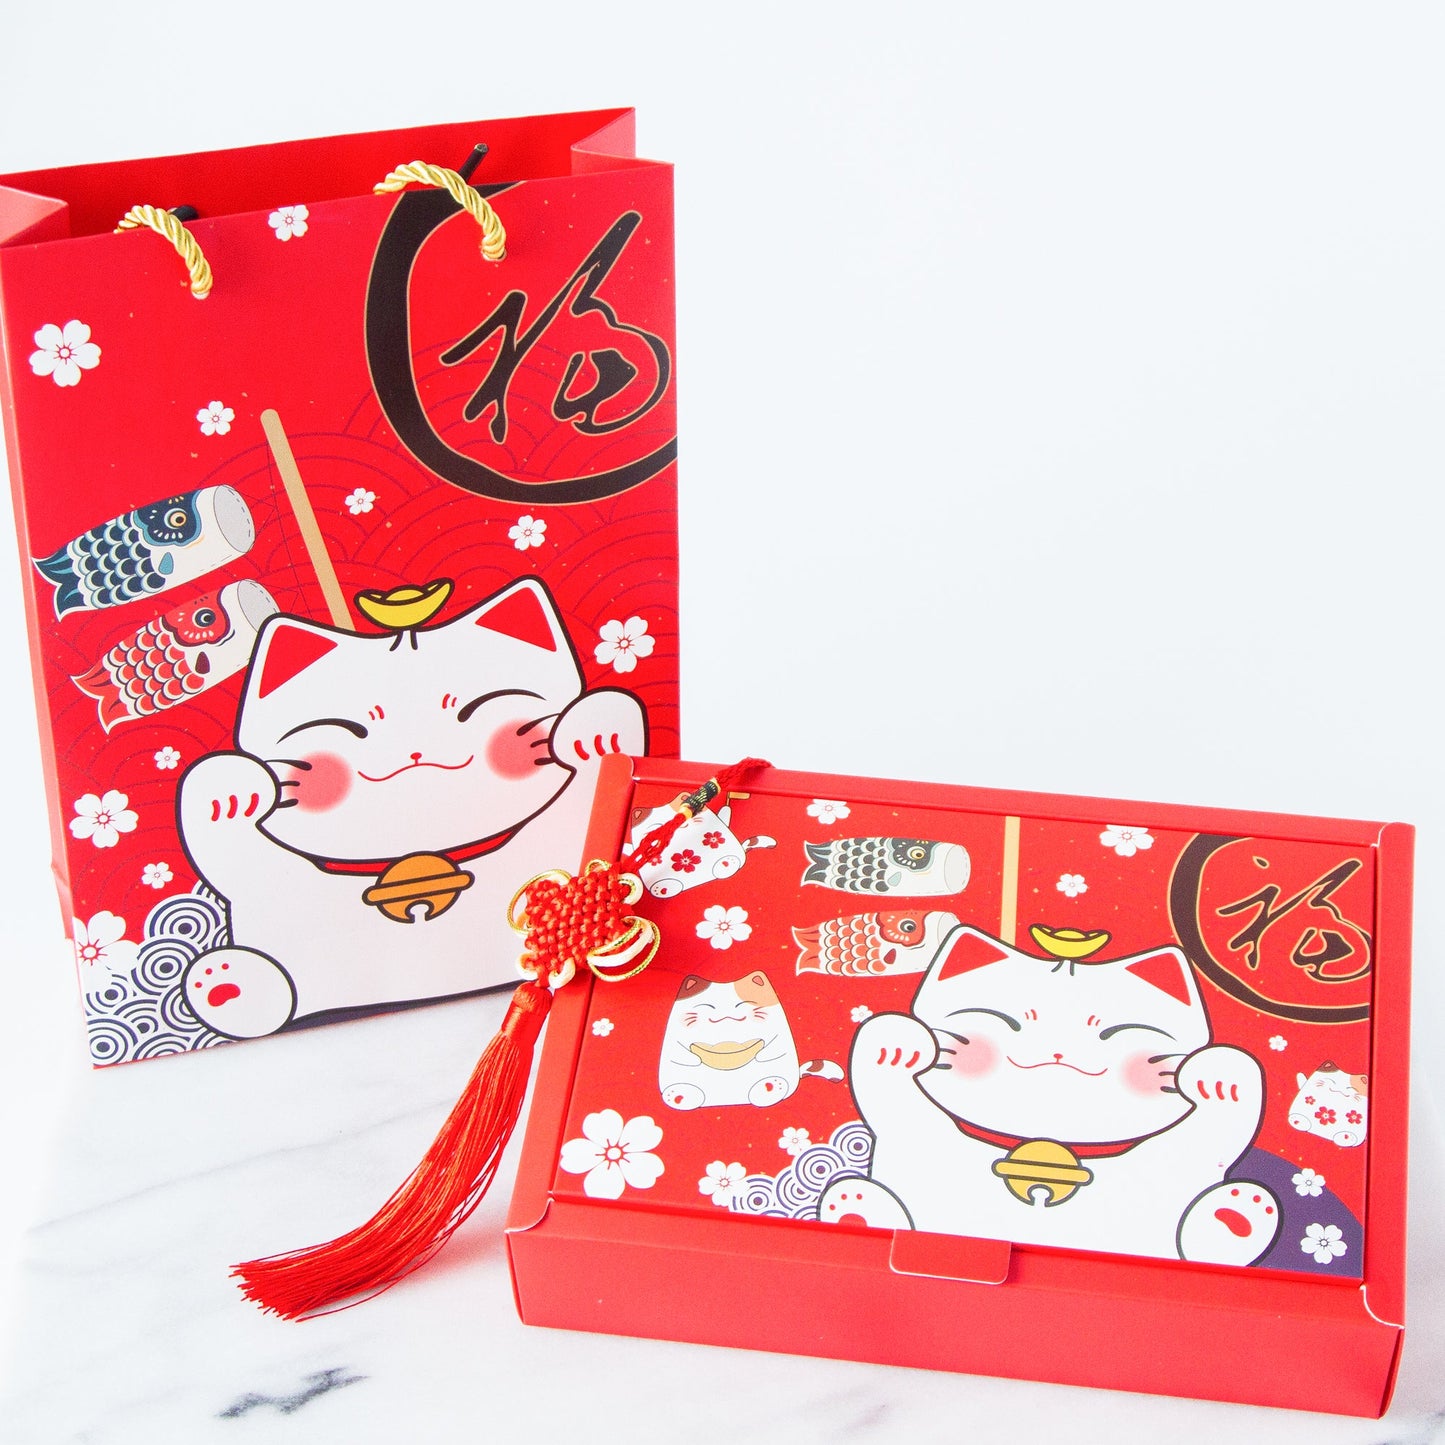 Year Of The Dragon! | 18 pcs macarons and brownies gift set |$31.80 nett only